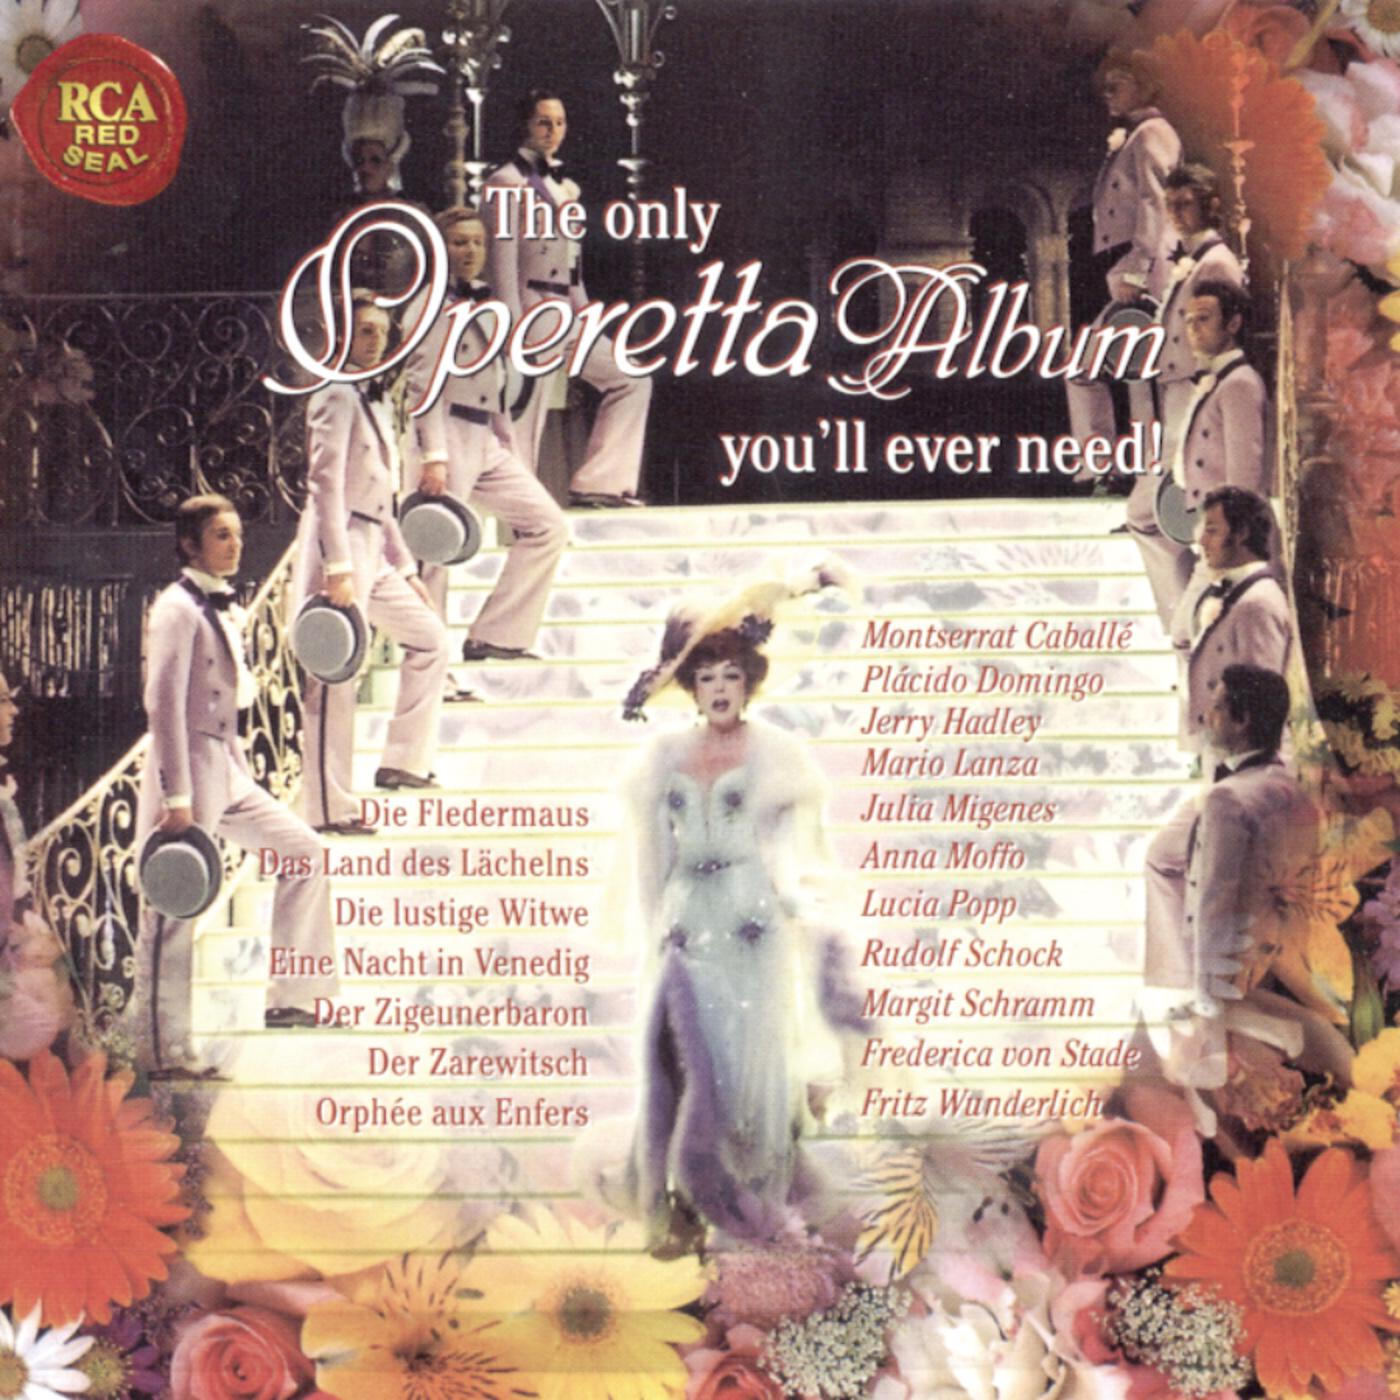 The Only Operetta Album You'll Ever Need